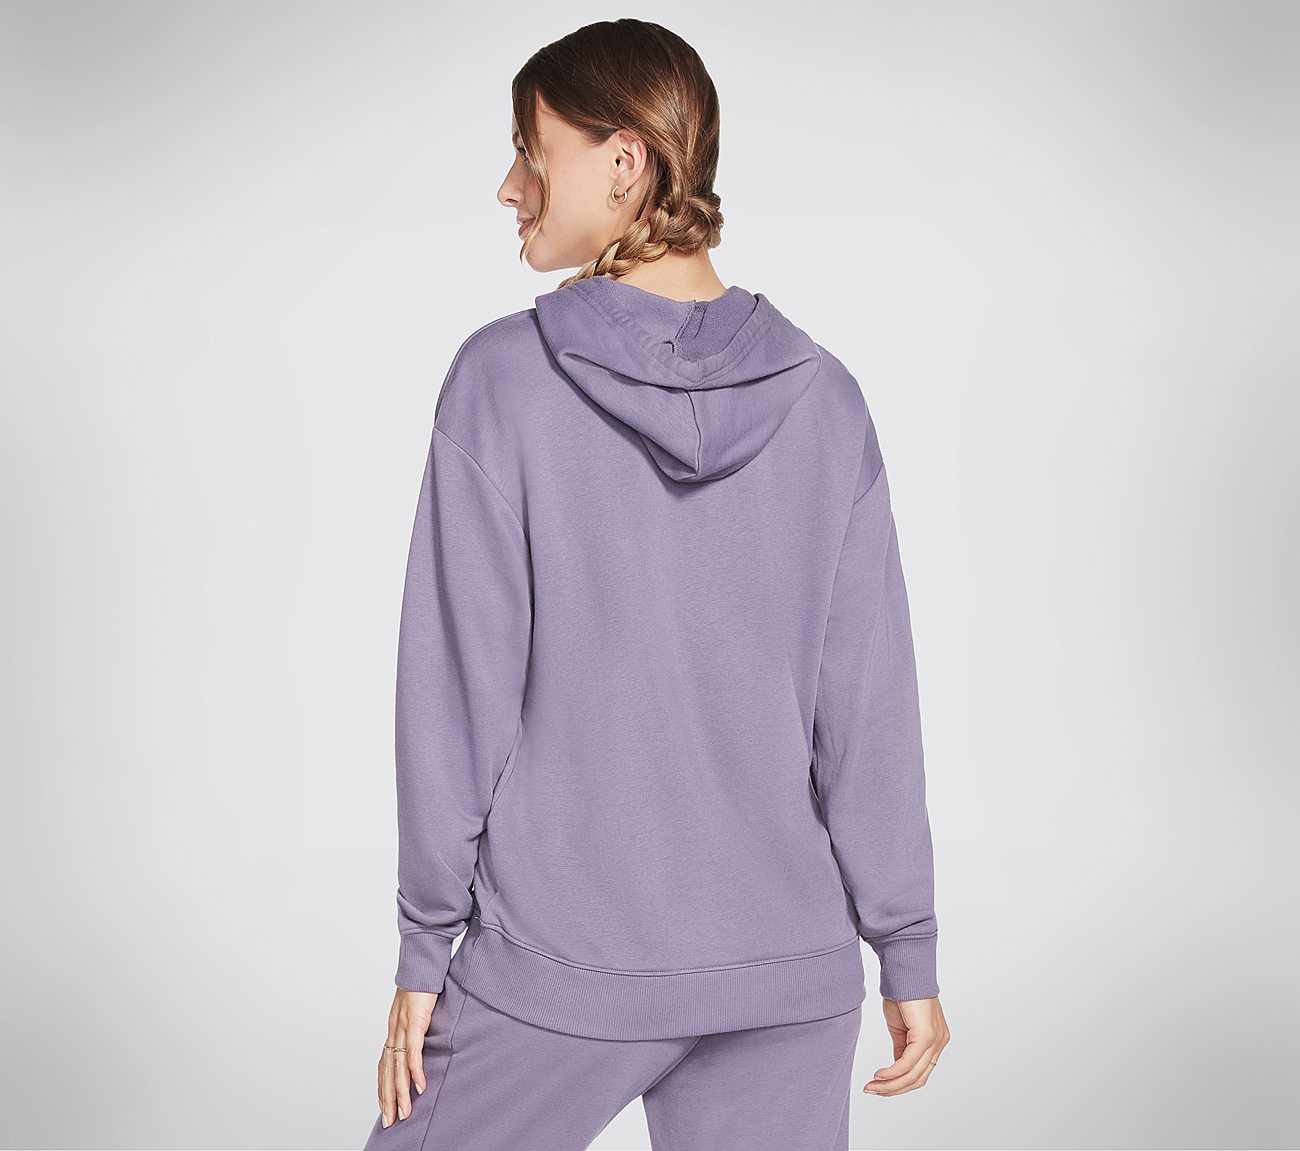 DAWG POUCH P/O HOODIE, GREY/PURPLE Apparel Top View